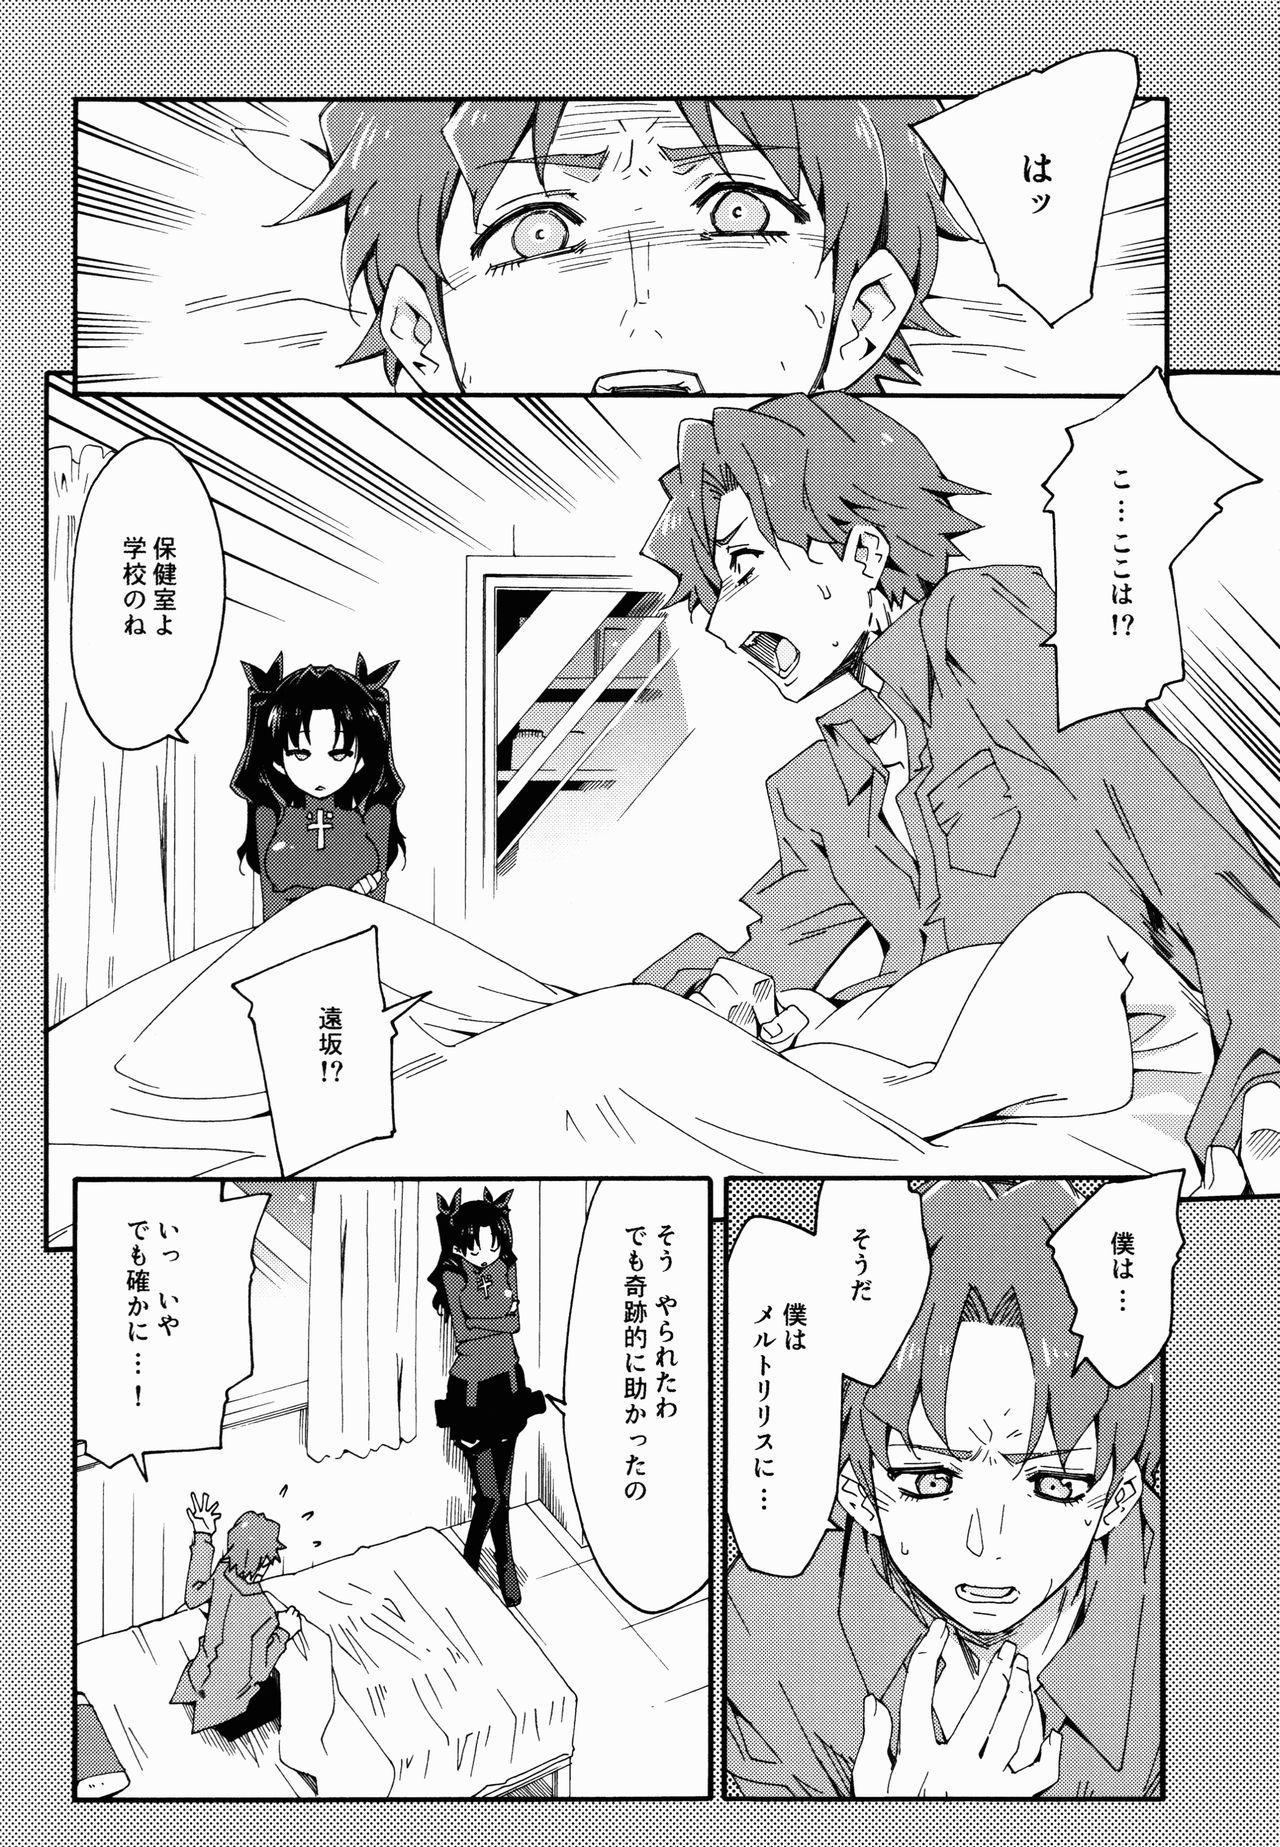 Fun Melty/kiss - Fate extra Exotic - Page 6